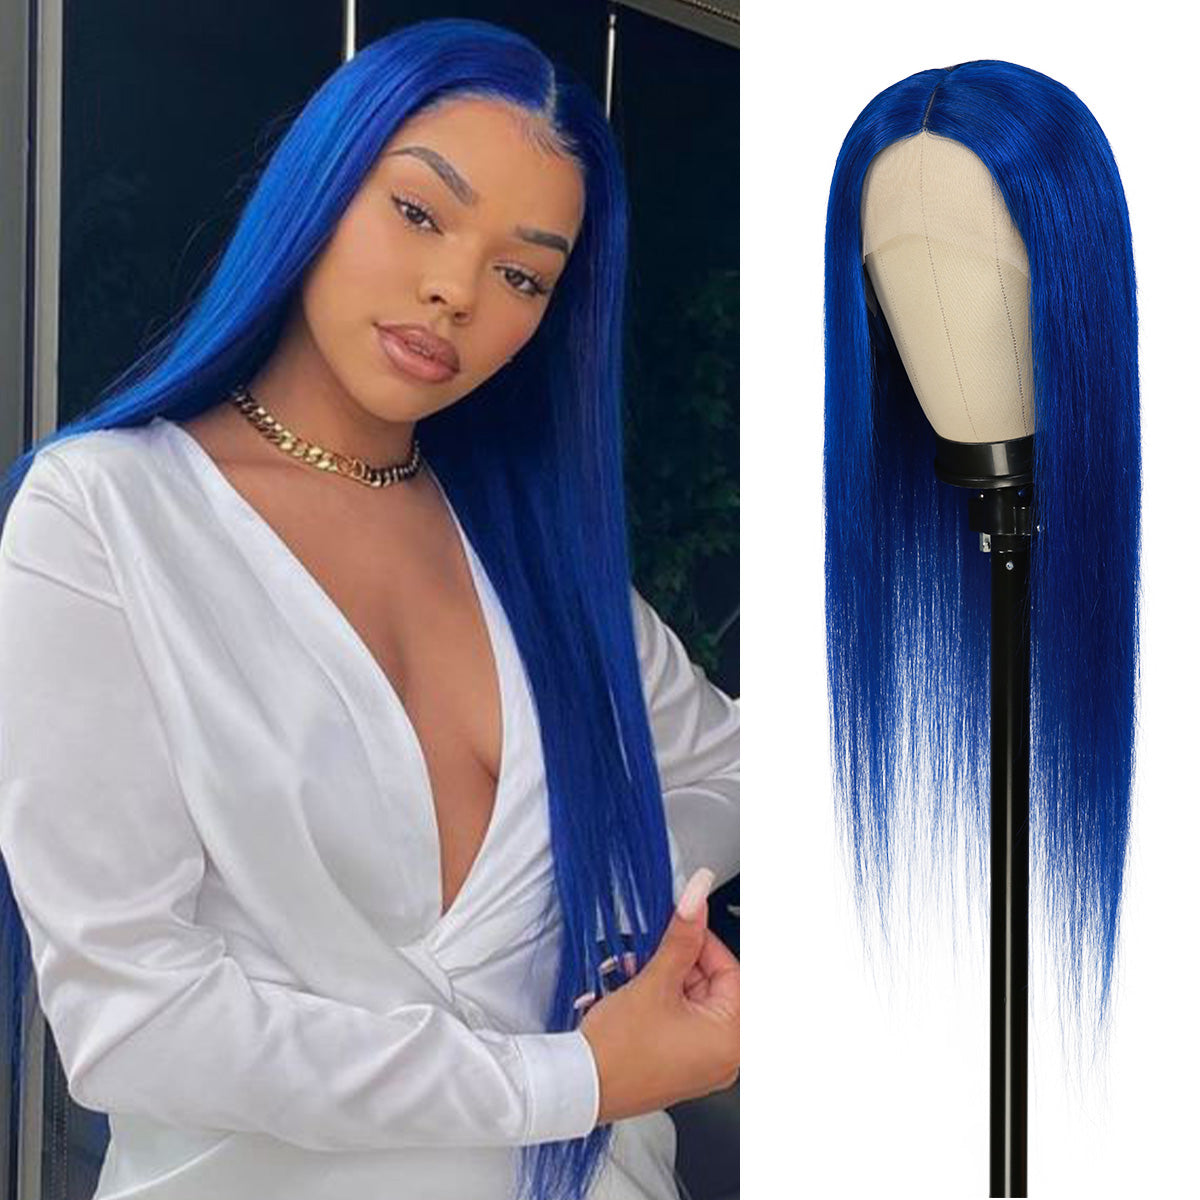 T part wig is the convenient but similar natural result compared with expensive lace front wigs. Gorgeous Solid Blue color for Special Occasion, Pre-dyed by expert. Middle Part Straight wig with Natural and imperceptible hairline